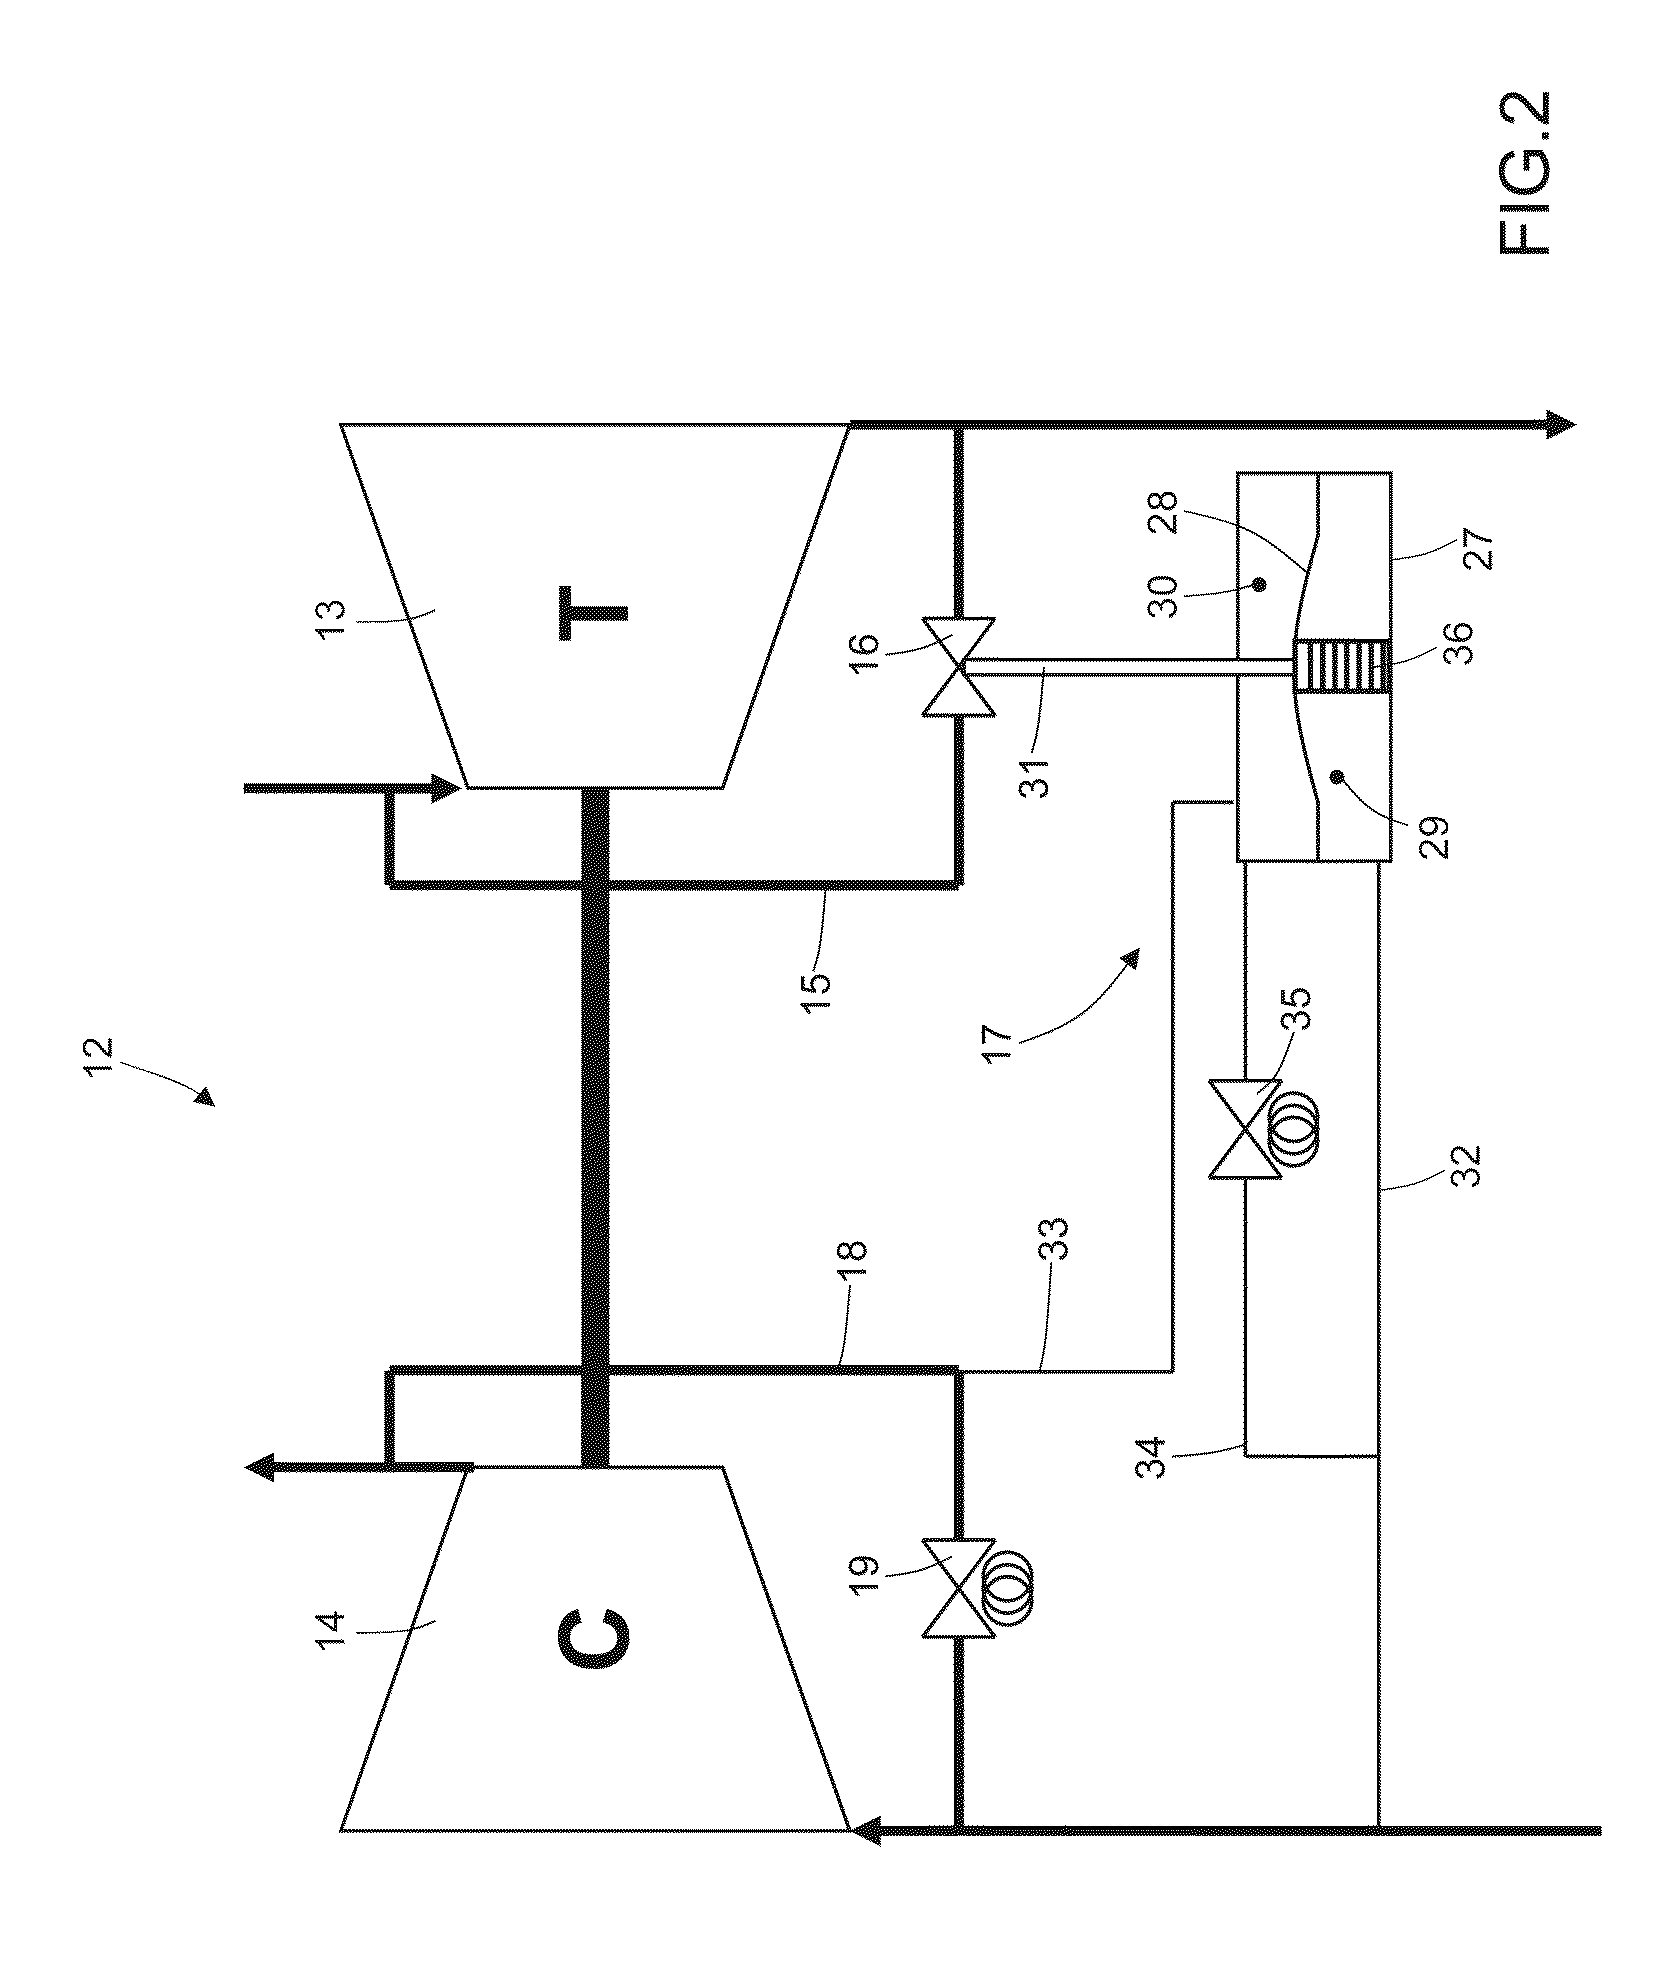 Method for the correction of the reduced mass flow rate of a compressor in an internal combustion engine turbocharged by means of a turbocharger